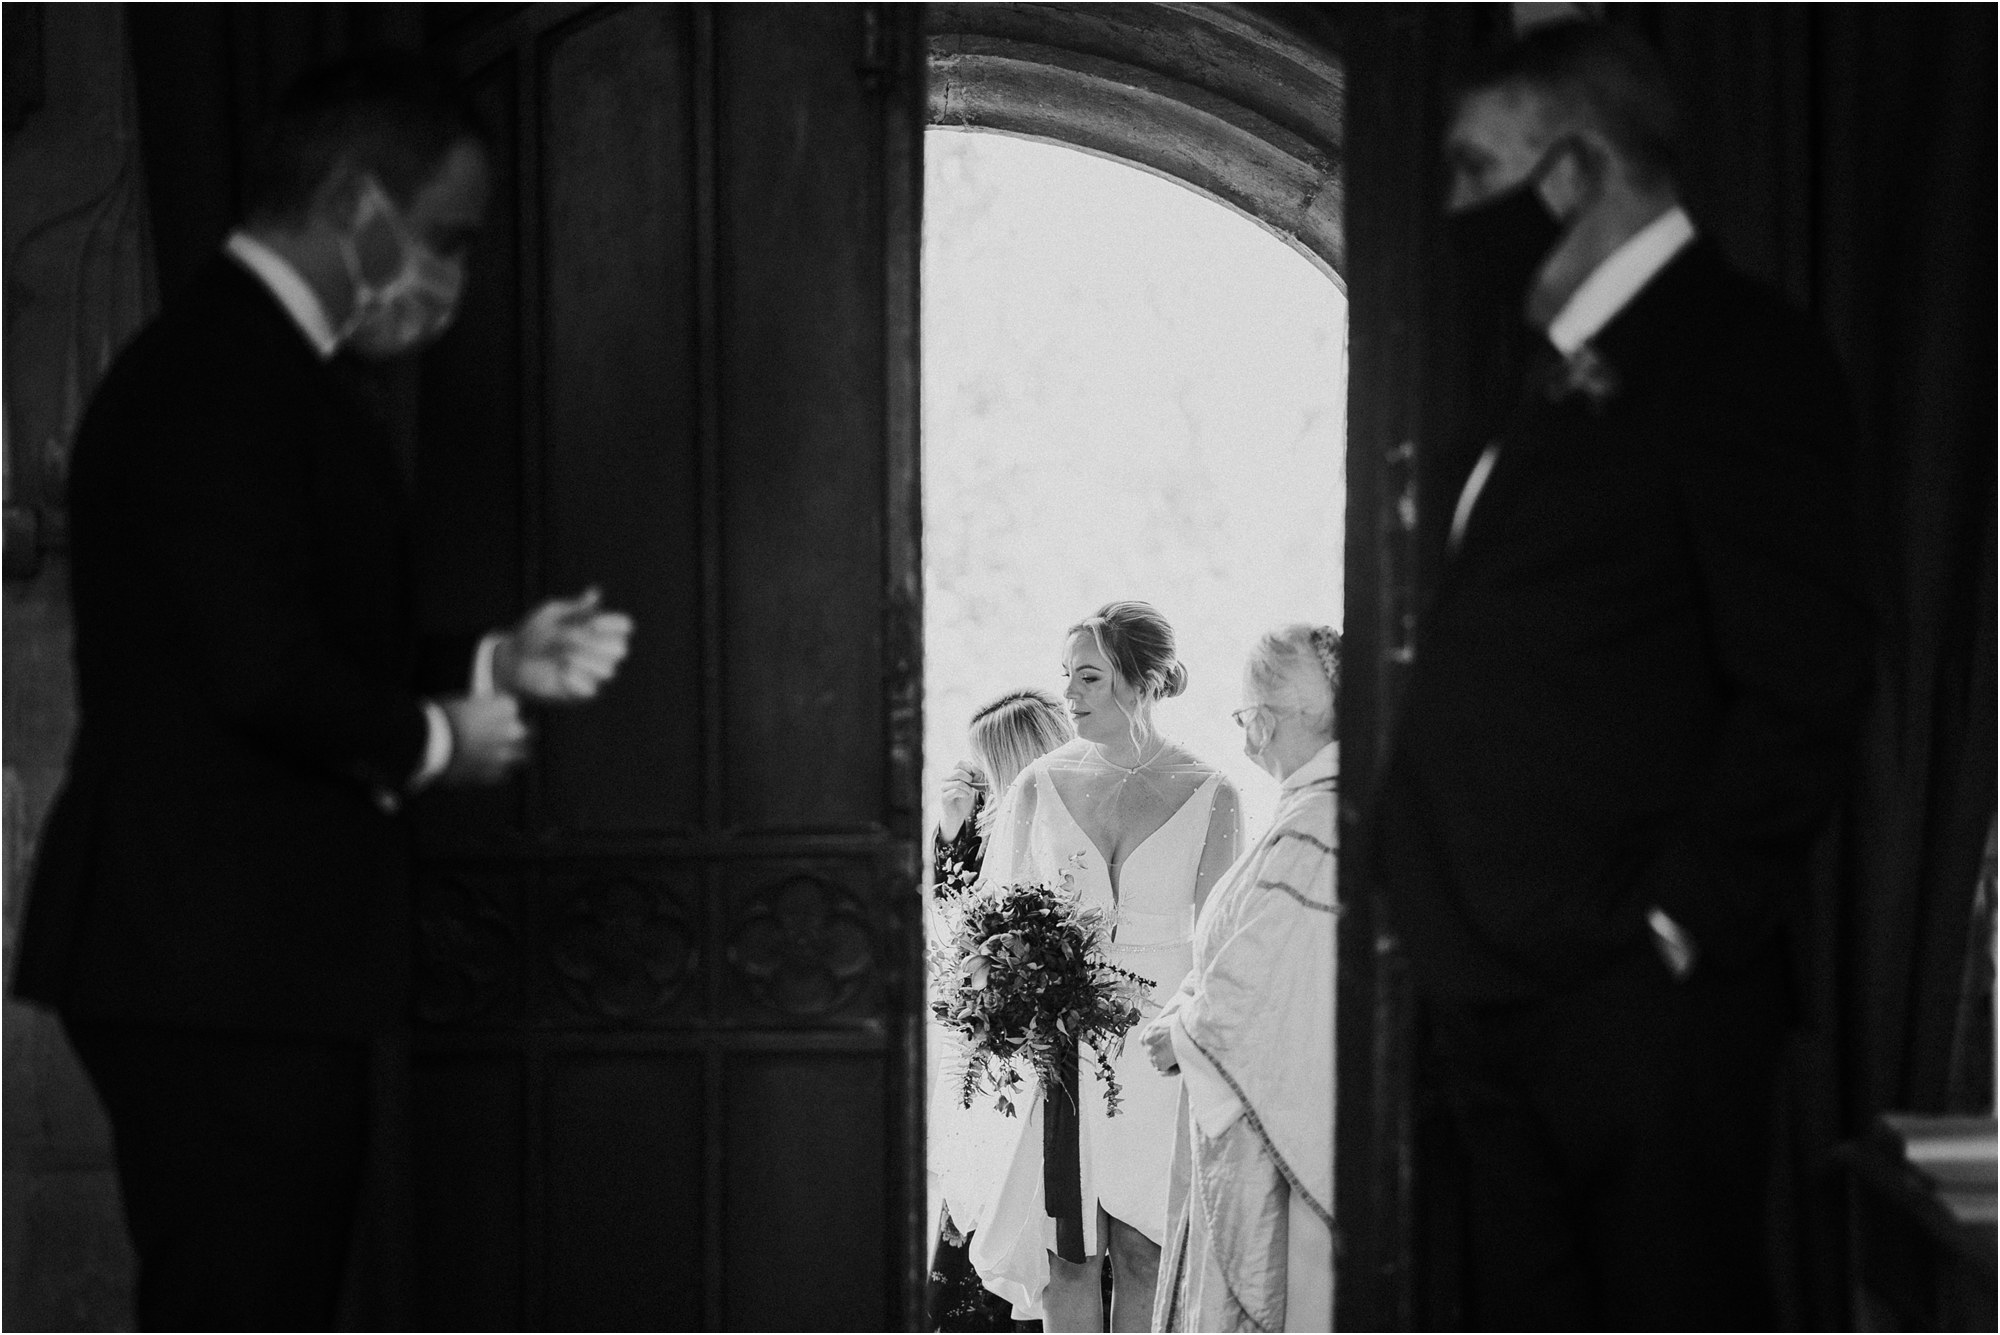 A intimate and small church wedding in Oxfordshrie